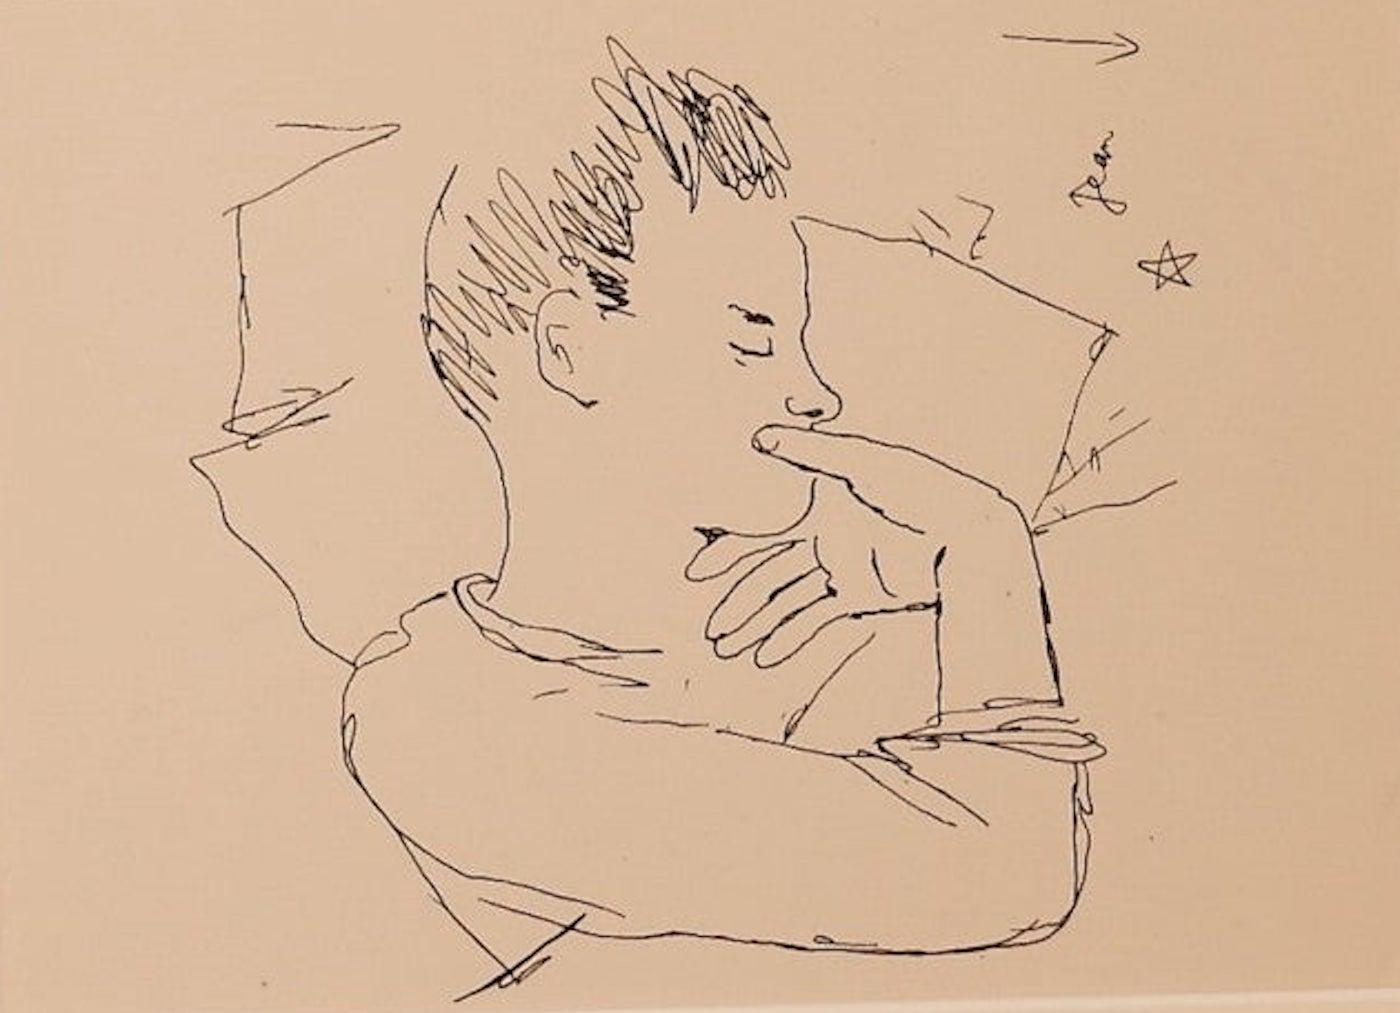 The Boy is an original photogravure realized by Jean Cocteau (1889 -1963) in 1930 ca., French draftsman, poet, essayist, playwright, librettist, film director.

Signed. With the blue stamp of” Collezione Contessa Anna Labtitia Pecci” on the